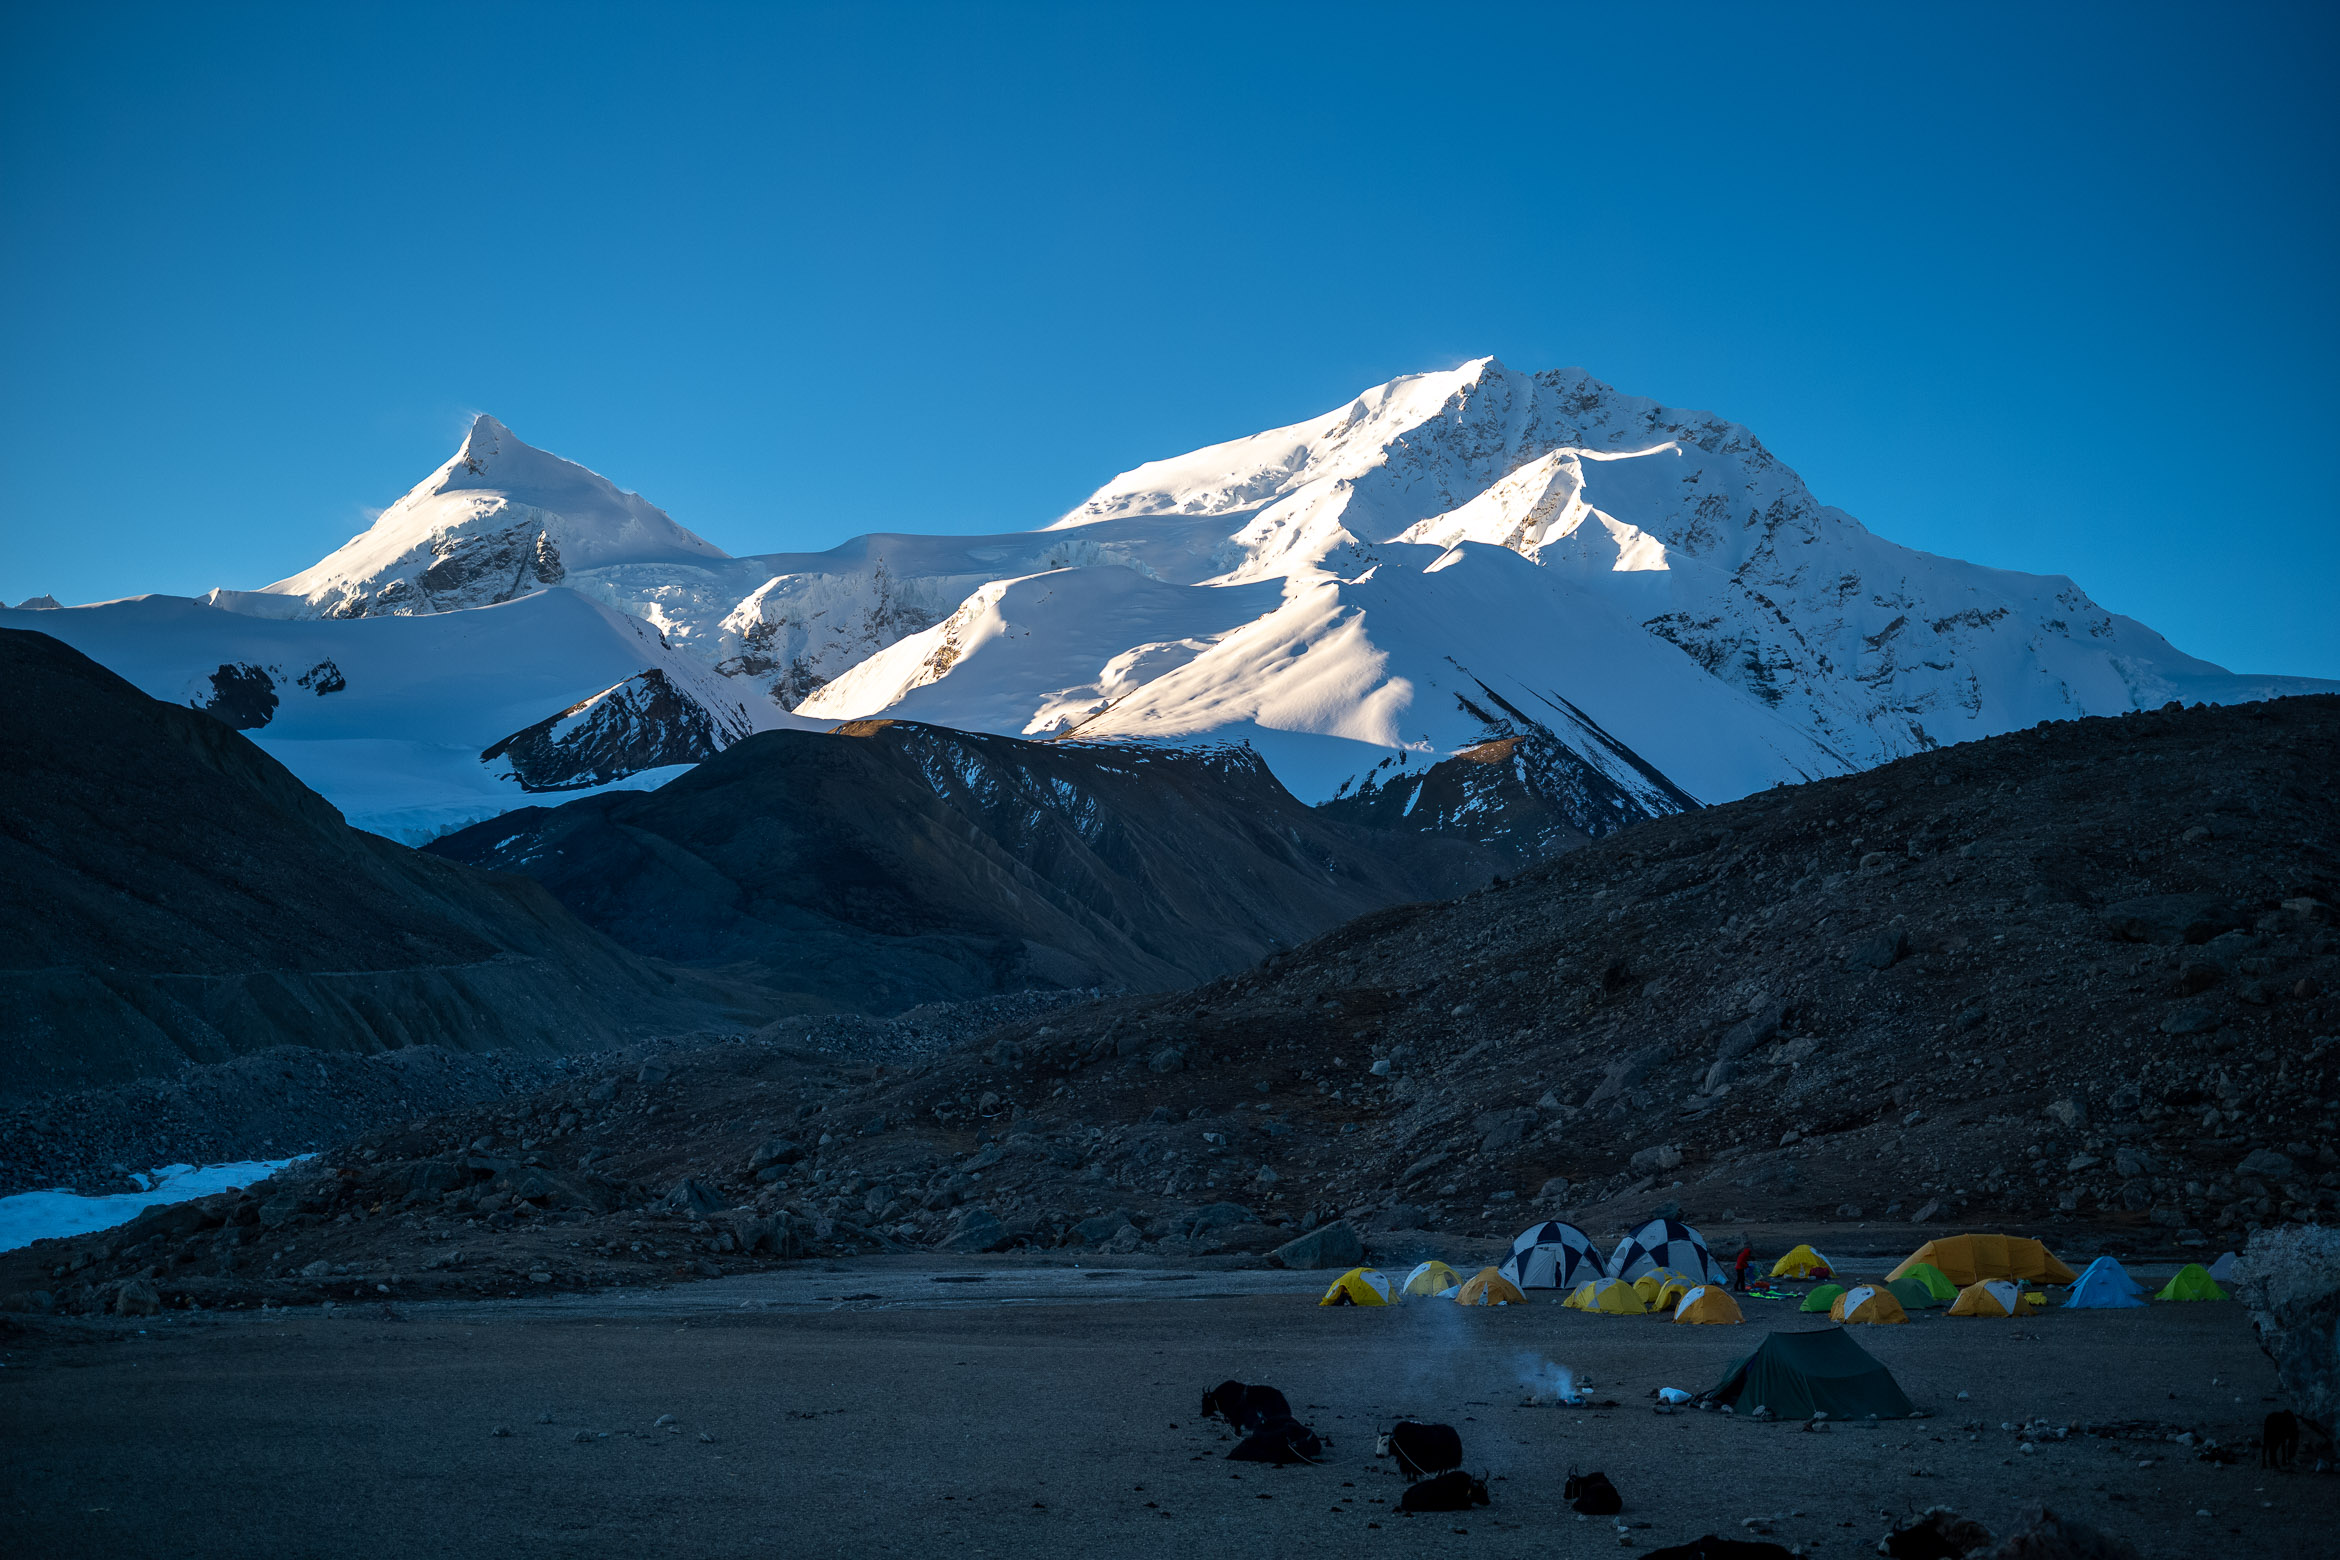 The camp is located at an altitude of 5700 meters. 海拔5700米处的营地